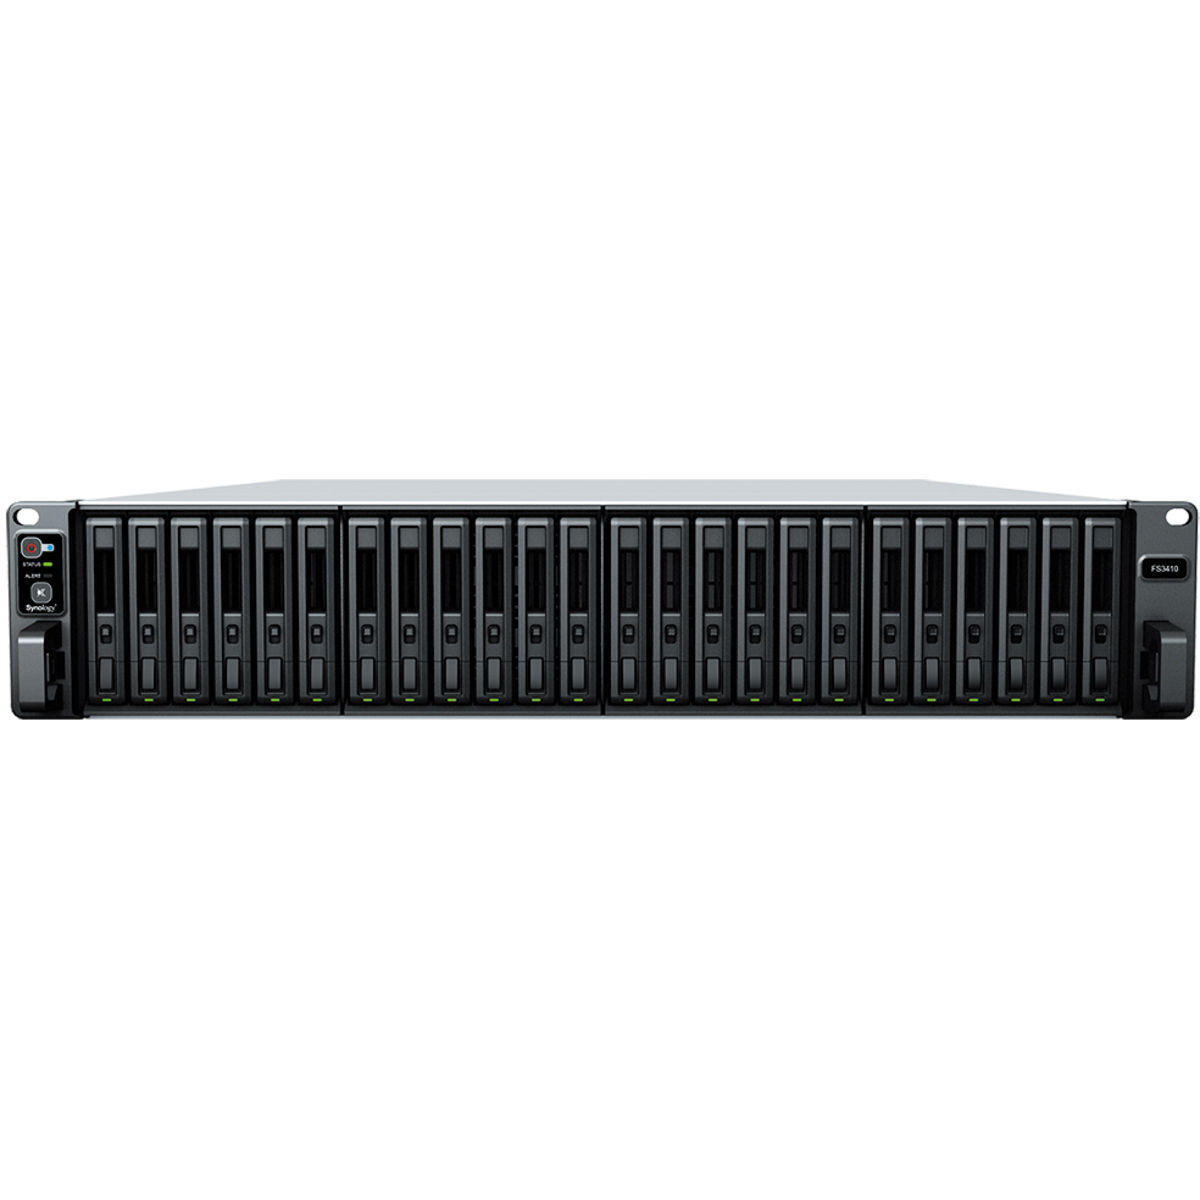 Synology FlashStation FS3410 88tb 24-Bay RackMount Large Business / Enterprise NAS - Network Attached Storage Device 22x4tb Samsung 870 QVO MZ-77Q4T0 2.5 560/530MB/s SATA 6Gb/s SSD CONSUMER Class Drives Installed - Burn-In Tested FlashStation FS3410